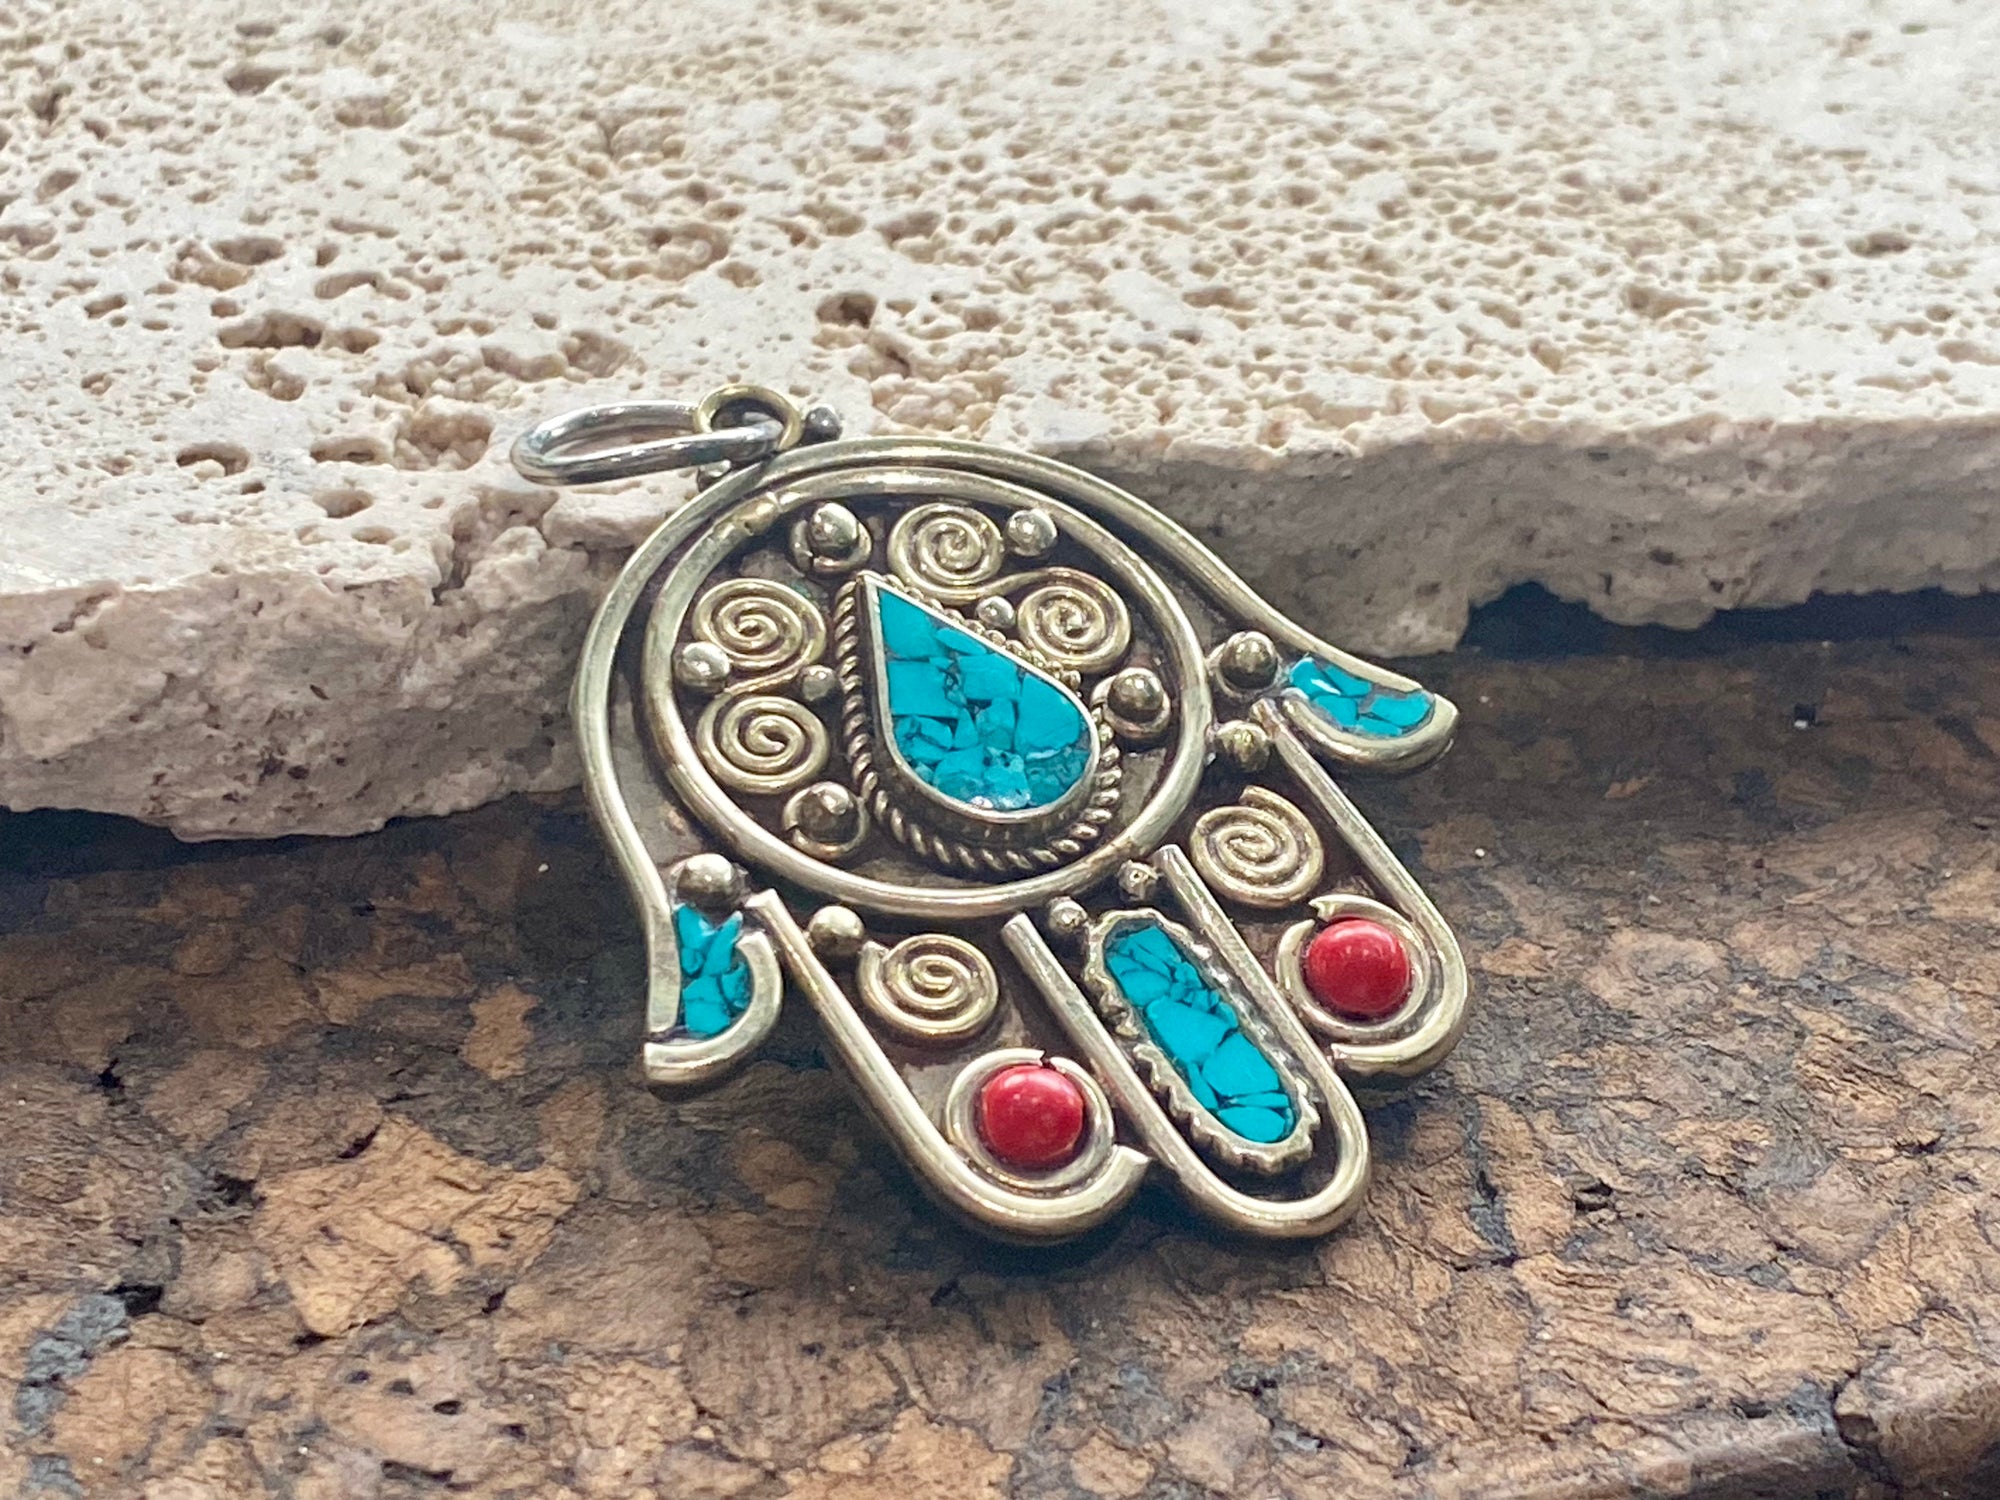 Beautiful hand made large hamsa pendant or charm set with ceramic turquoise and coral inserts. Non silver. Large bail for hanging. This is not just a piece for wearing around the neck. It can be hung anywhere you'd like it in the house. Height 5 cm